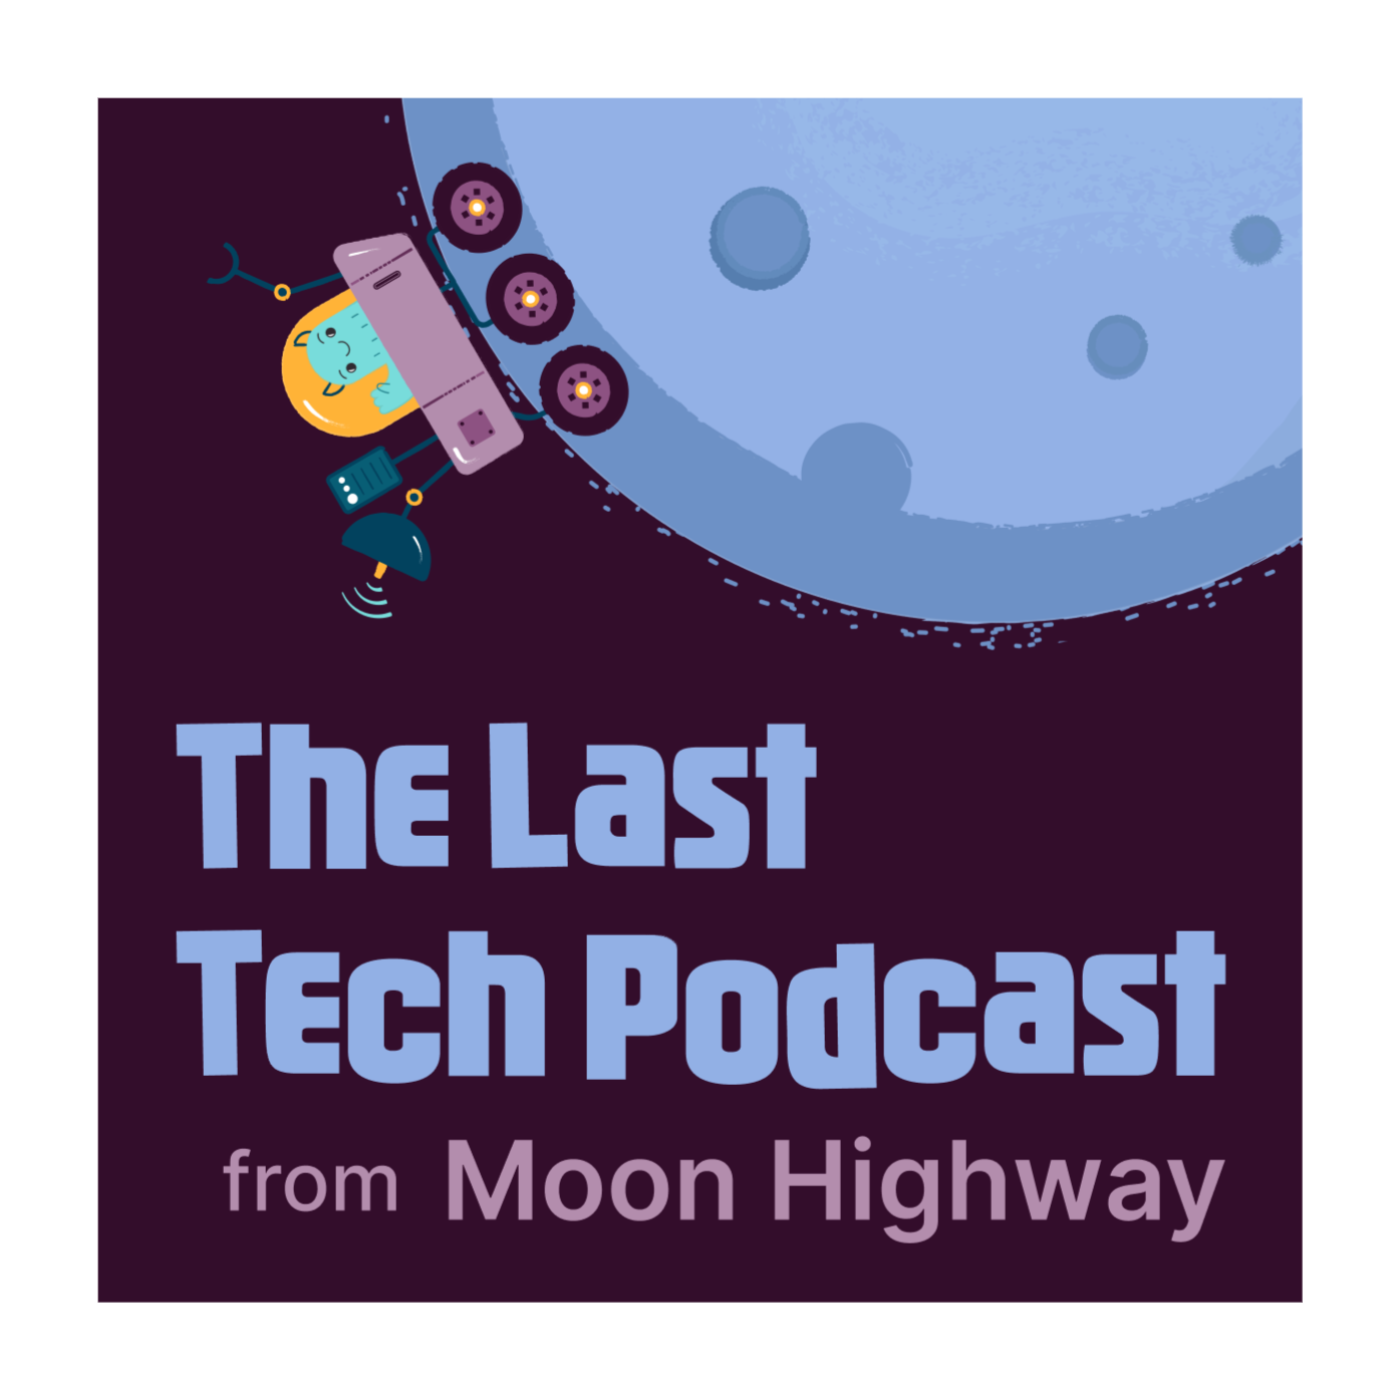 The Last Tech Podcast podcast show image